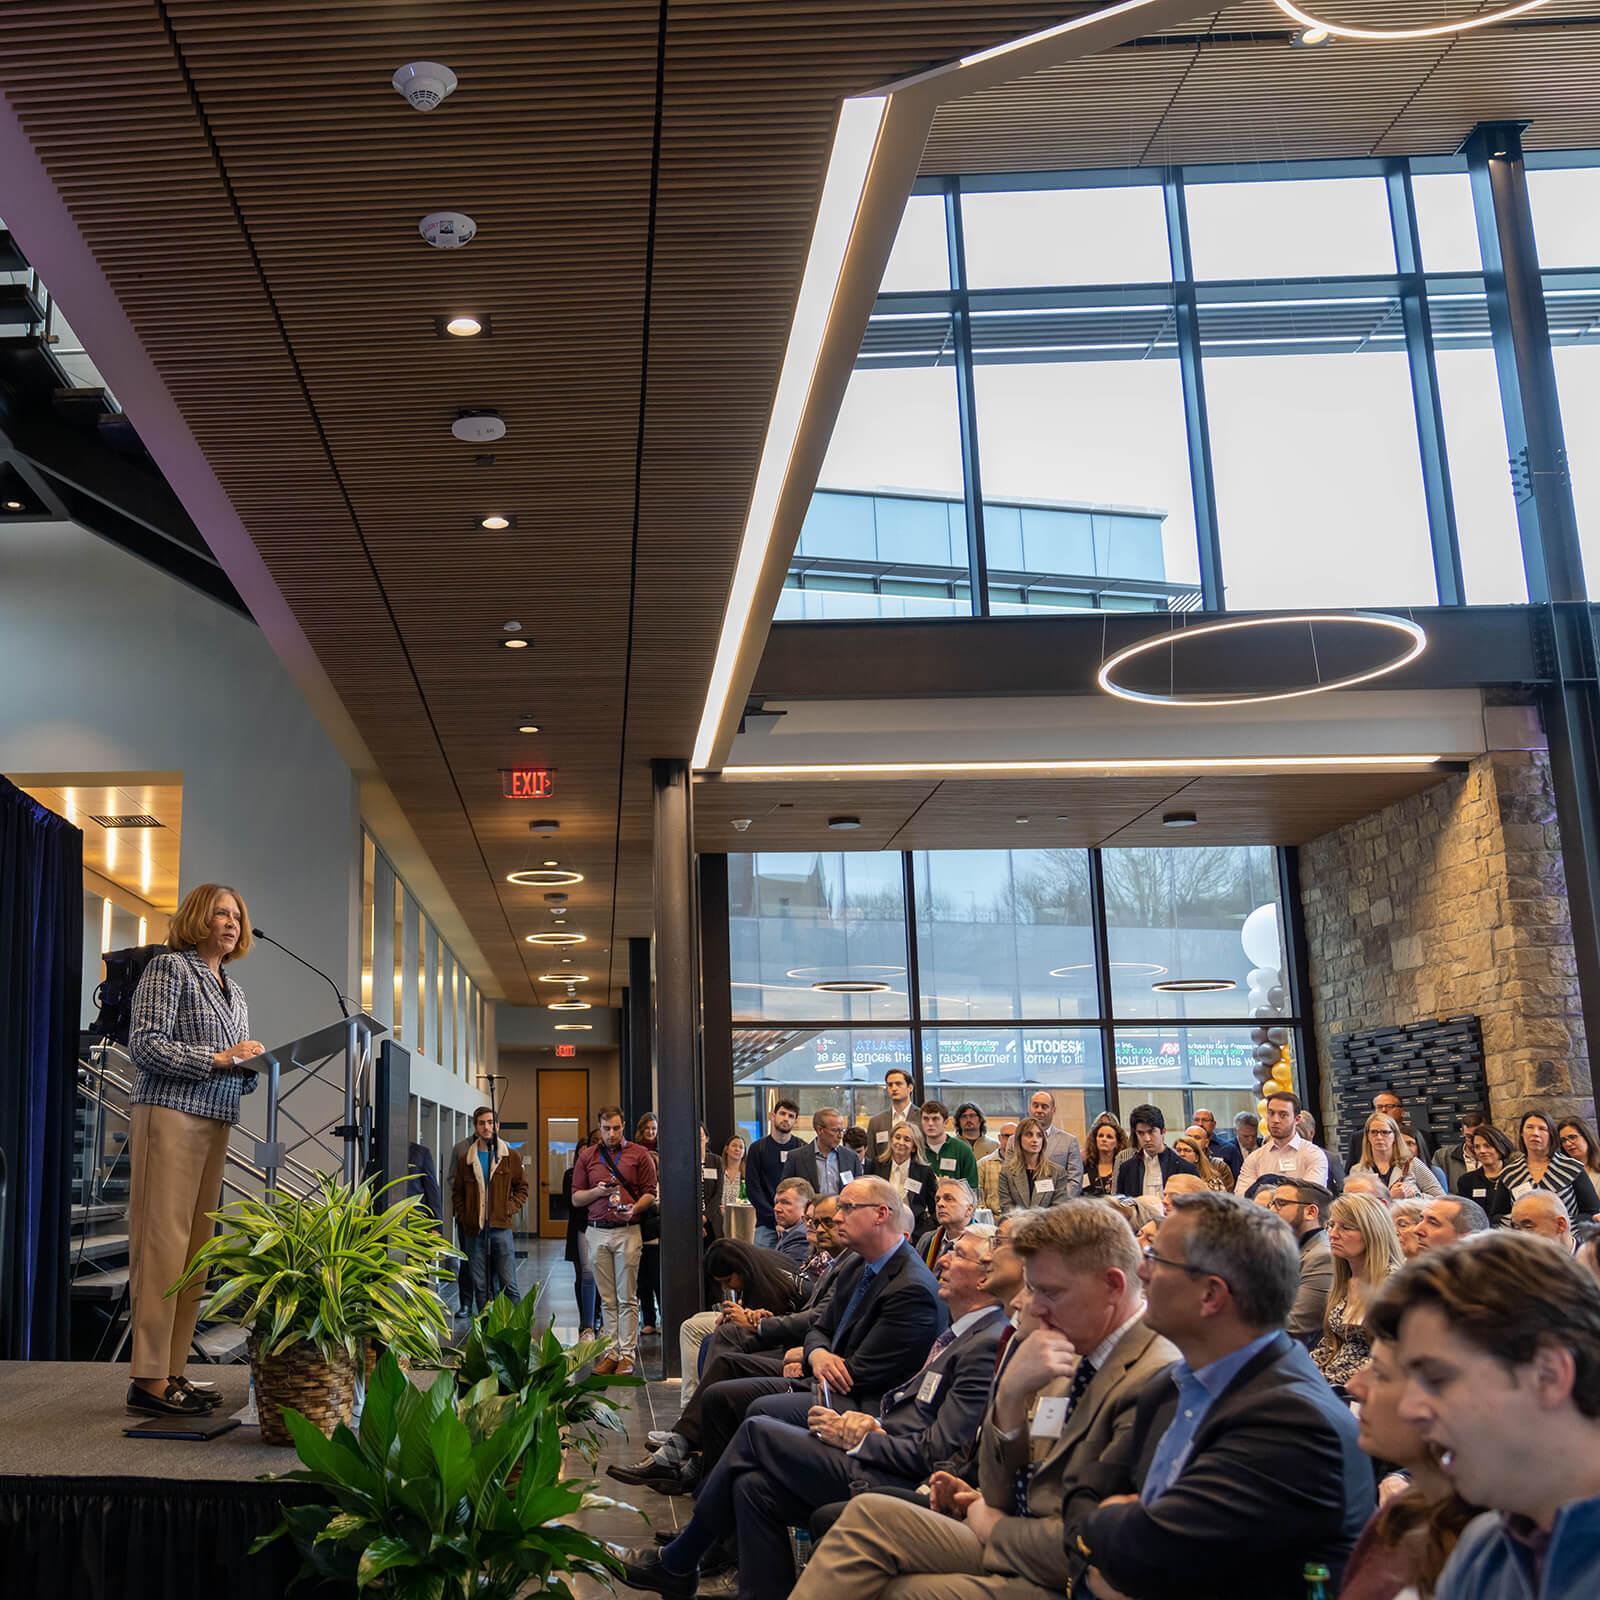 Dean Philips stands on a stage in front of a seated assembly in the lobby of the Business Innovation Building.